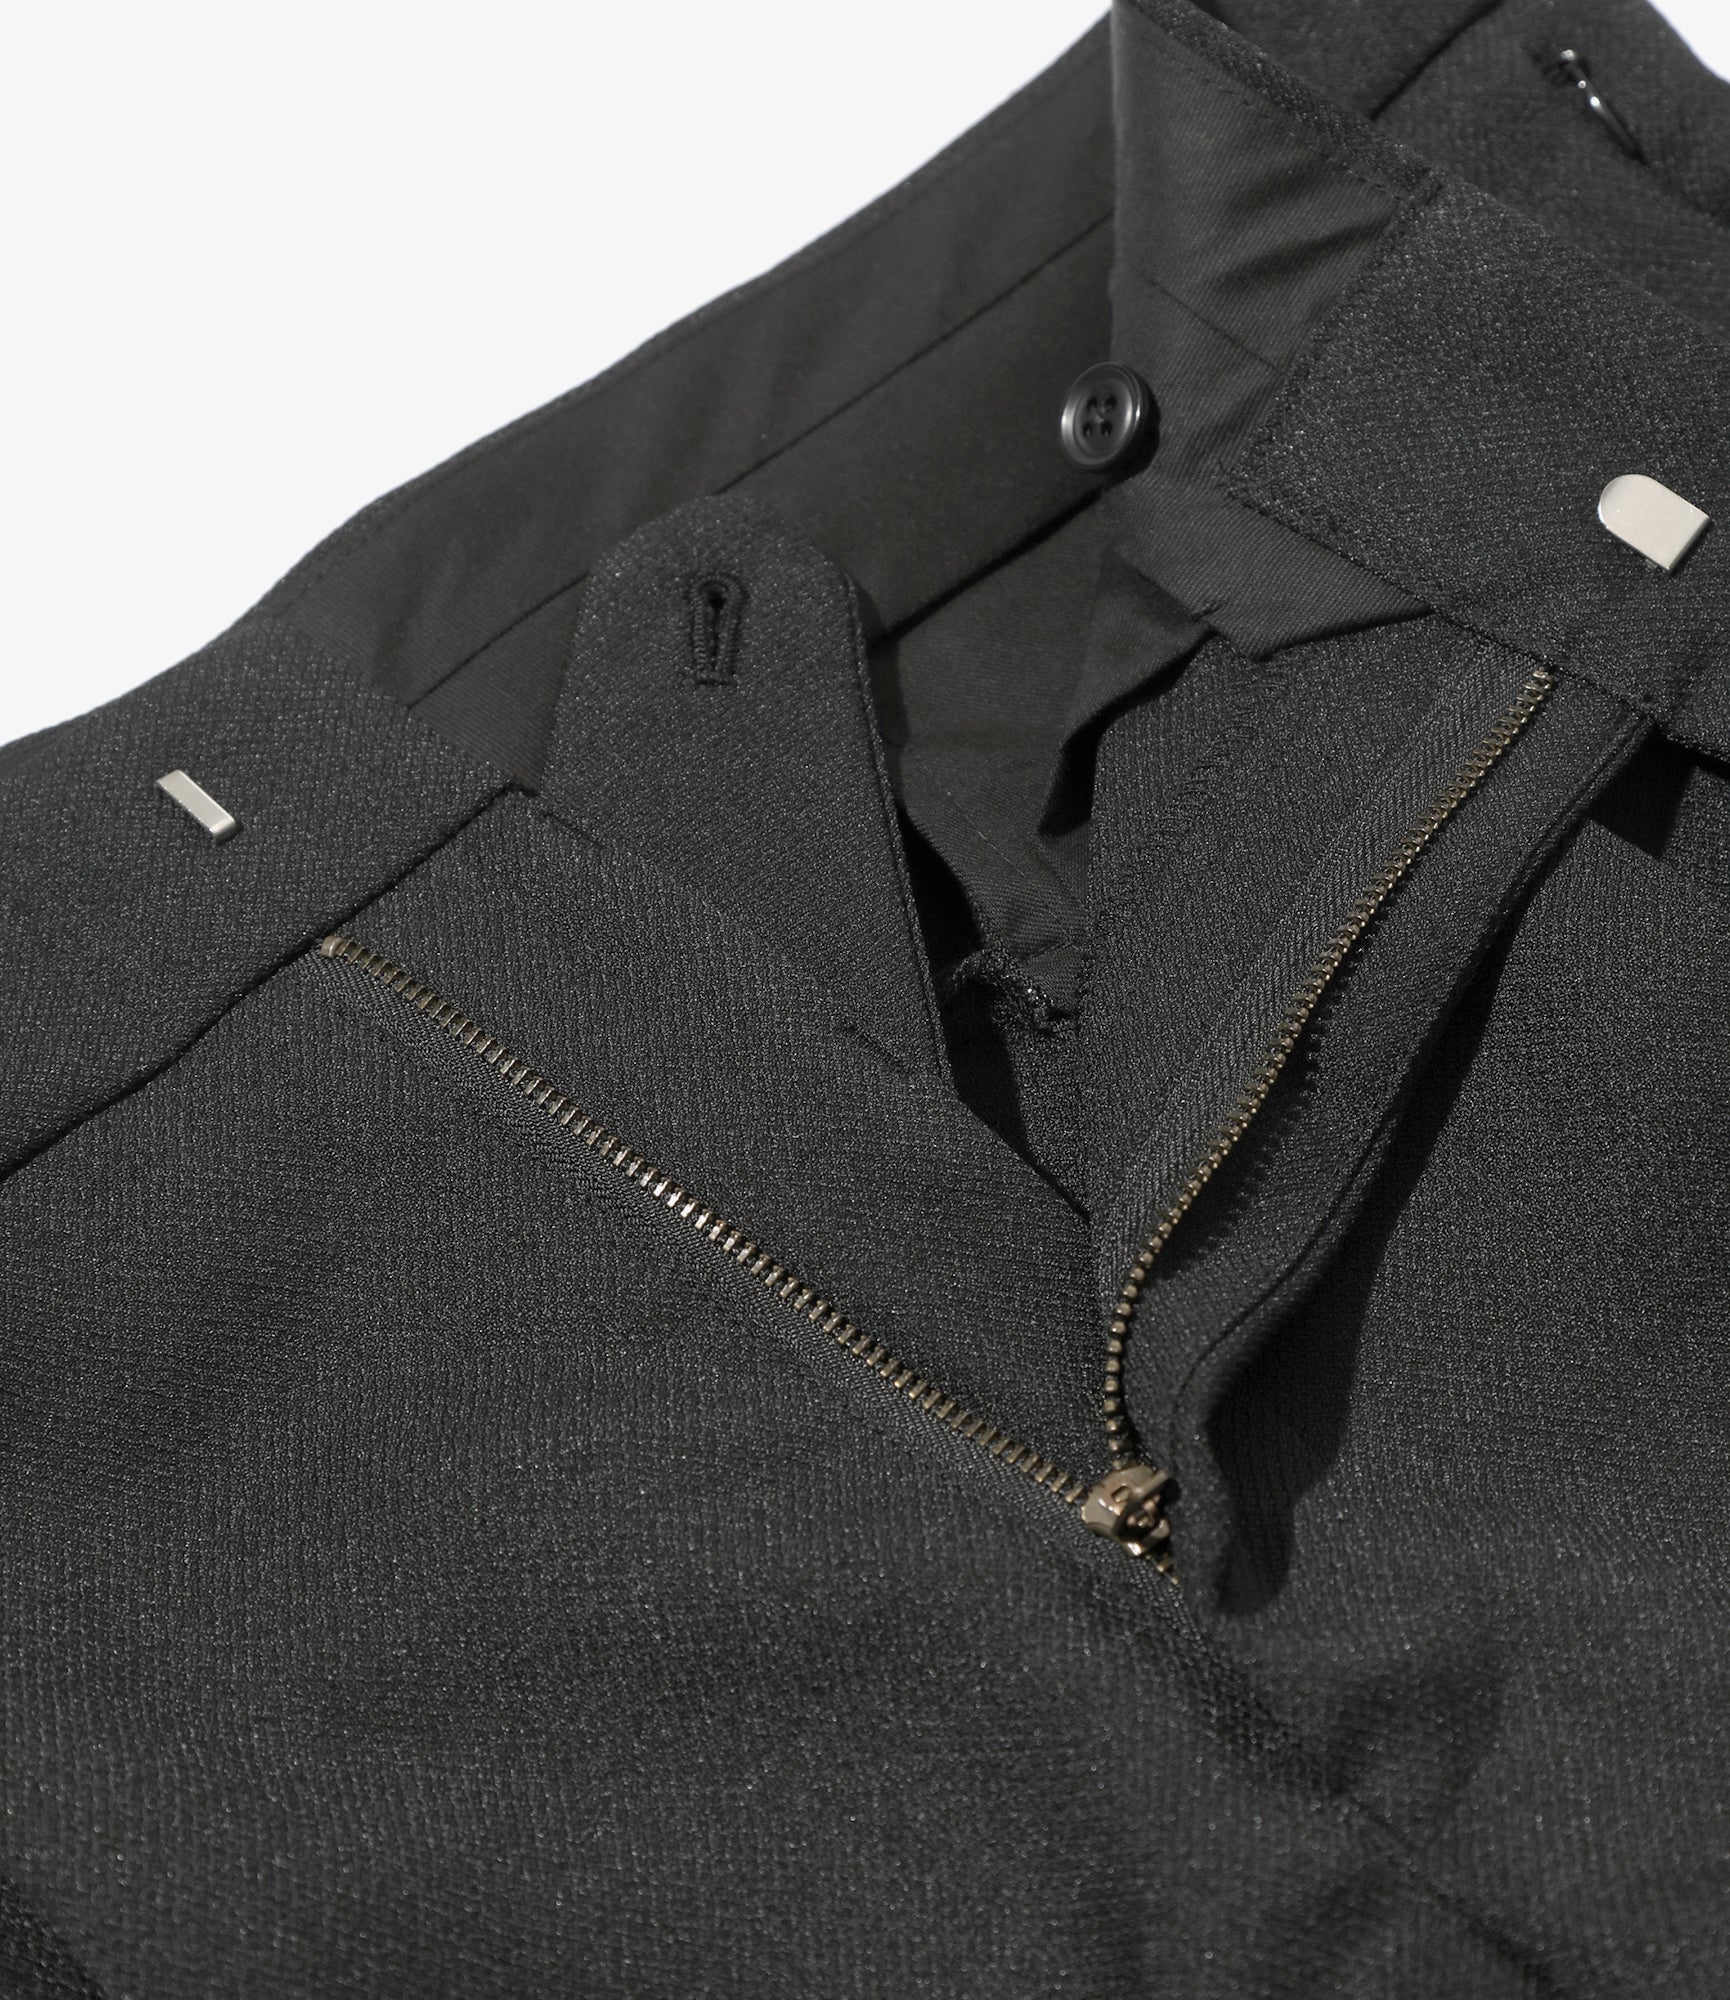 Tucked Side Tab Trouser - Black - Poly Dobby Cloth